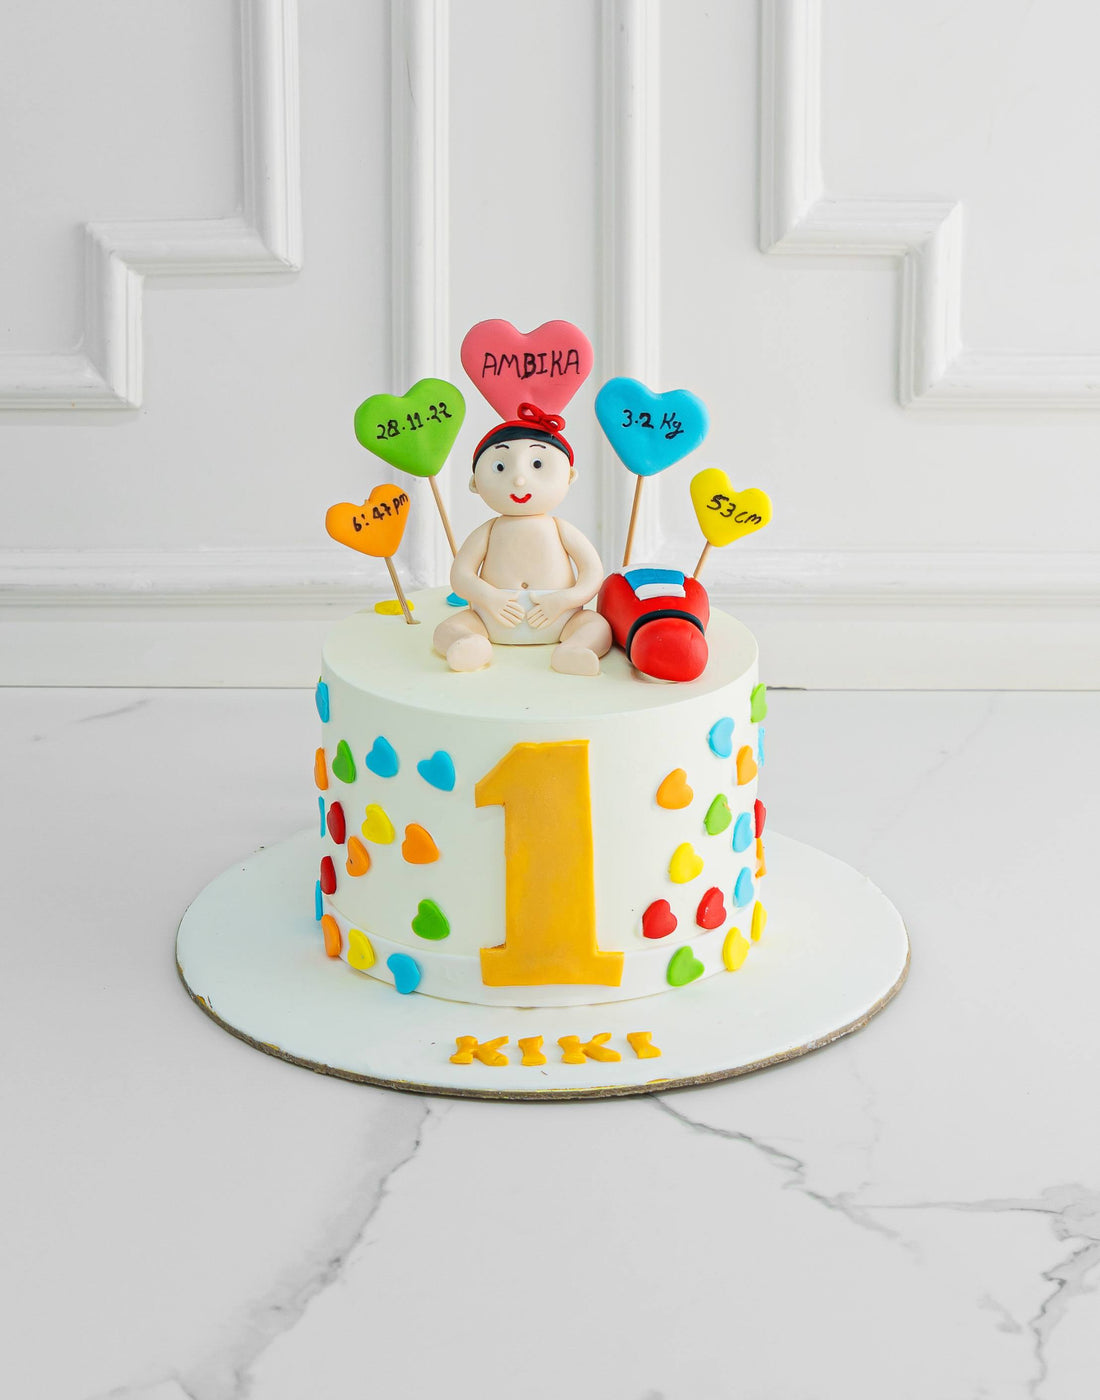 Welcome baby Surprise Cake. Cake for Baby. Delivery in Gurgaon and Noida